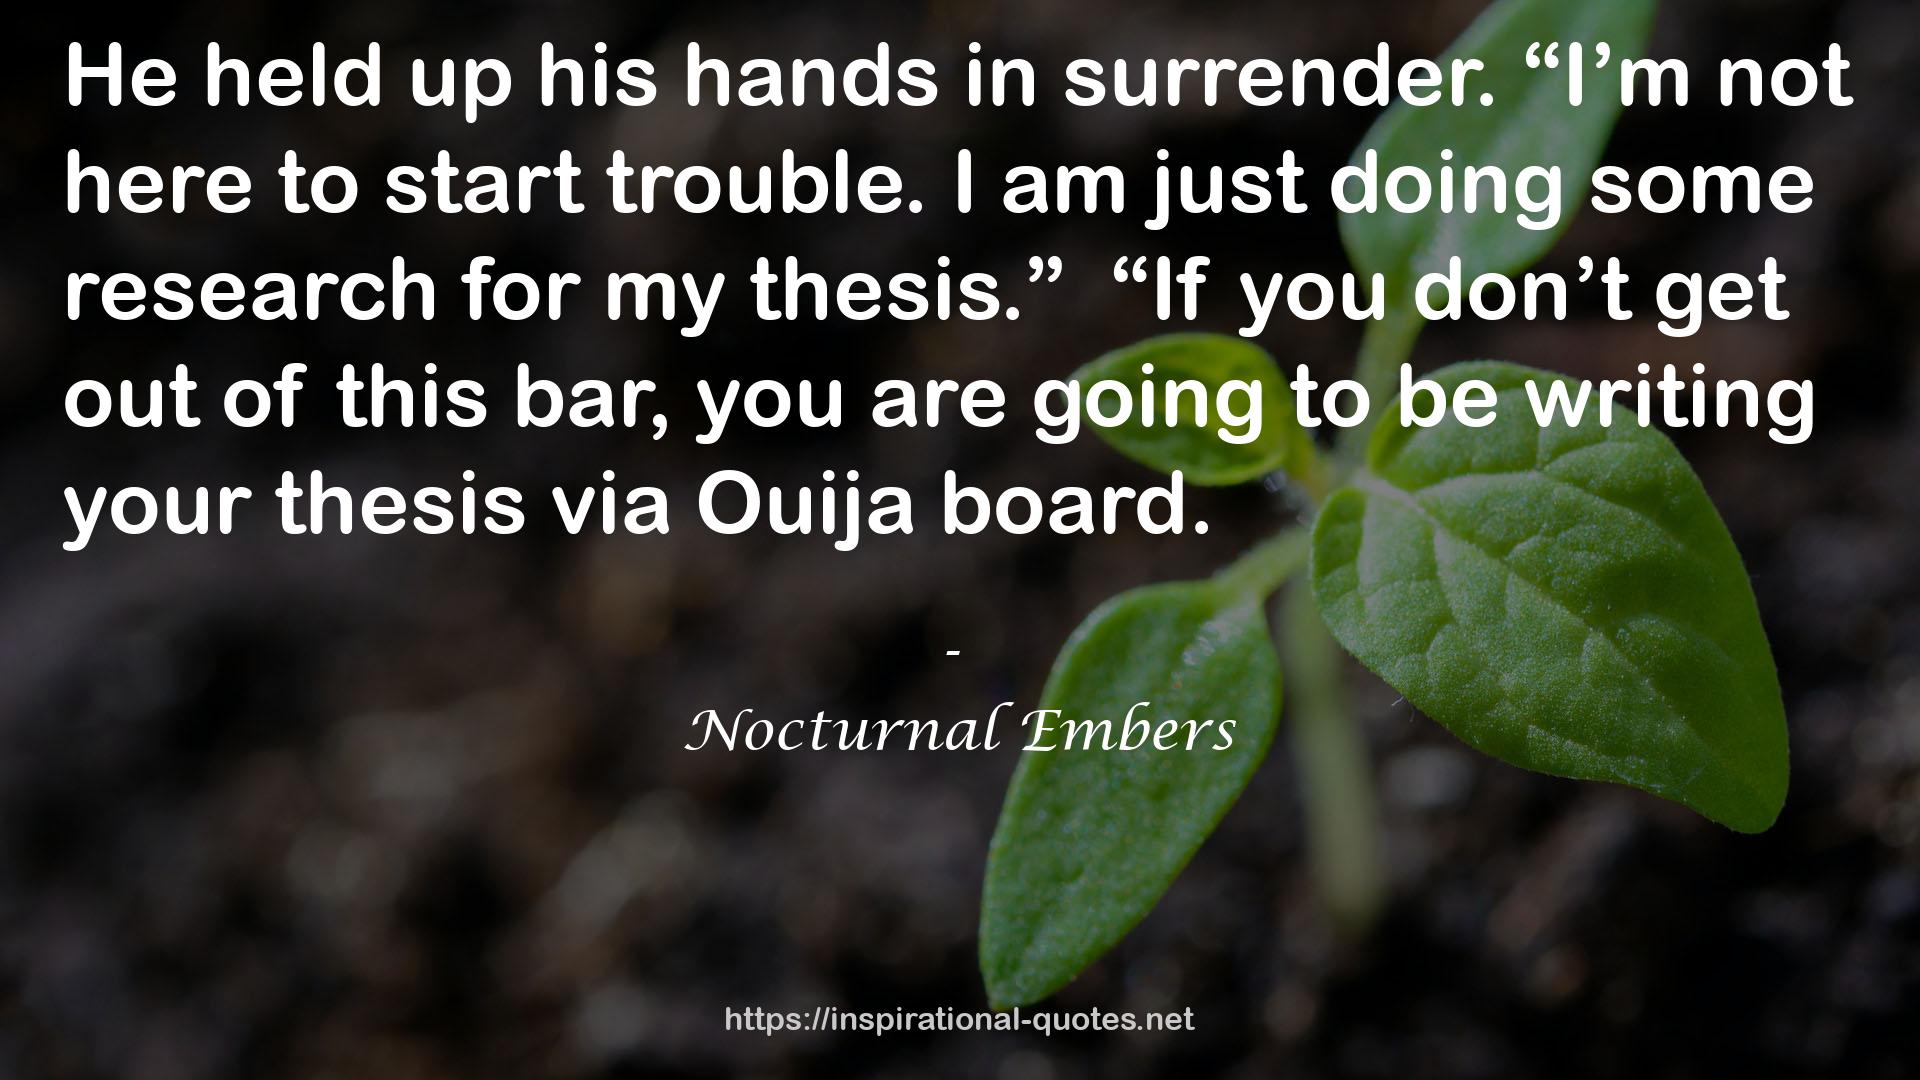 Nocturnal Embers QUOTES